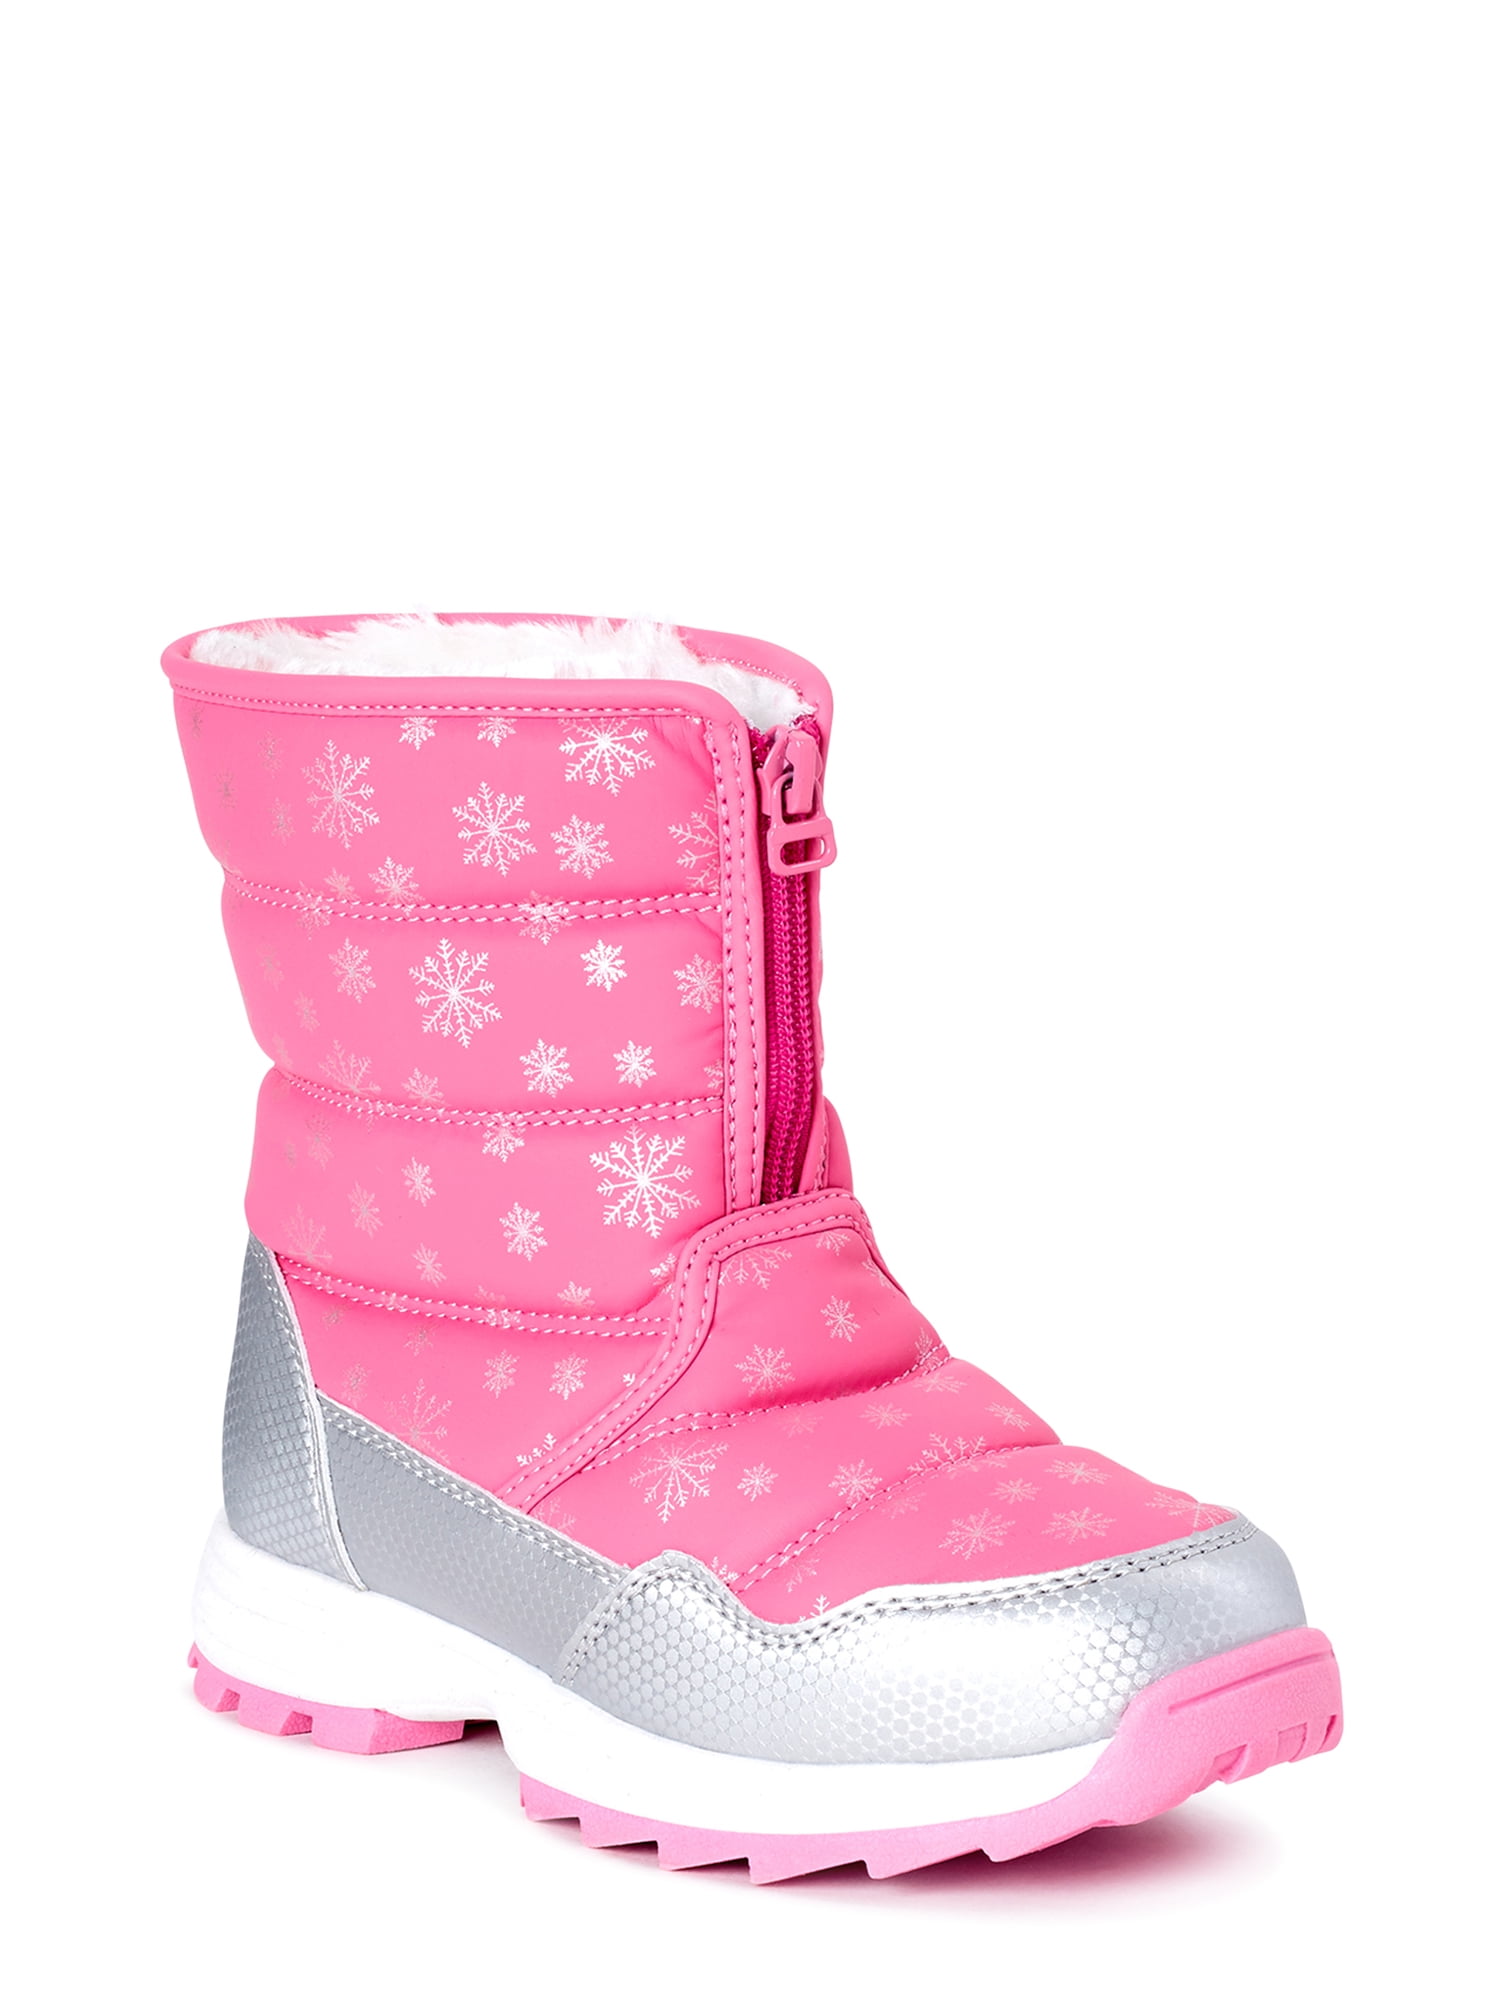 snow boots for girls size 3